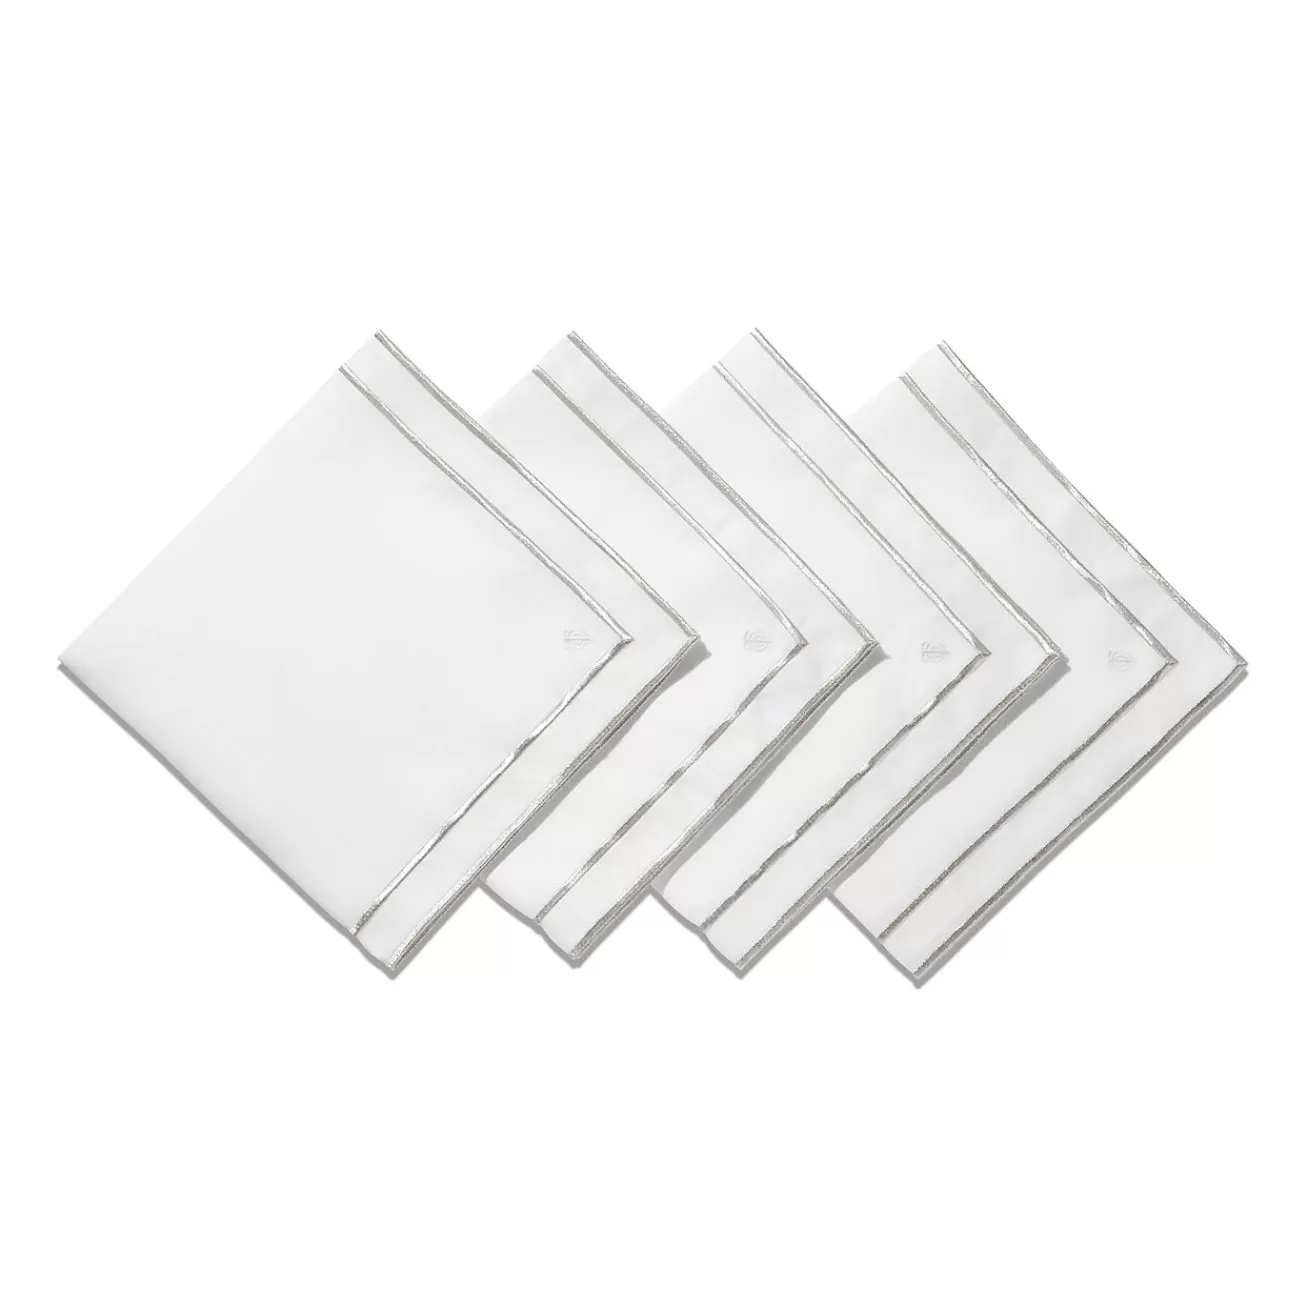 Tiffany & Co. Tiffany Home Essentials Embroidered Napkins in Linen, Set of Four | ^ Decor | Table Linens